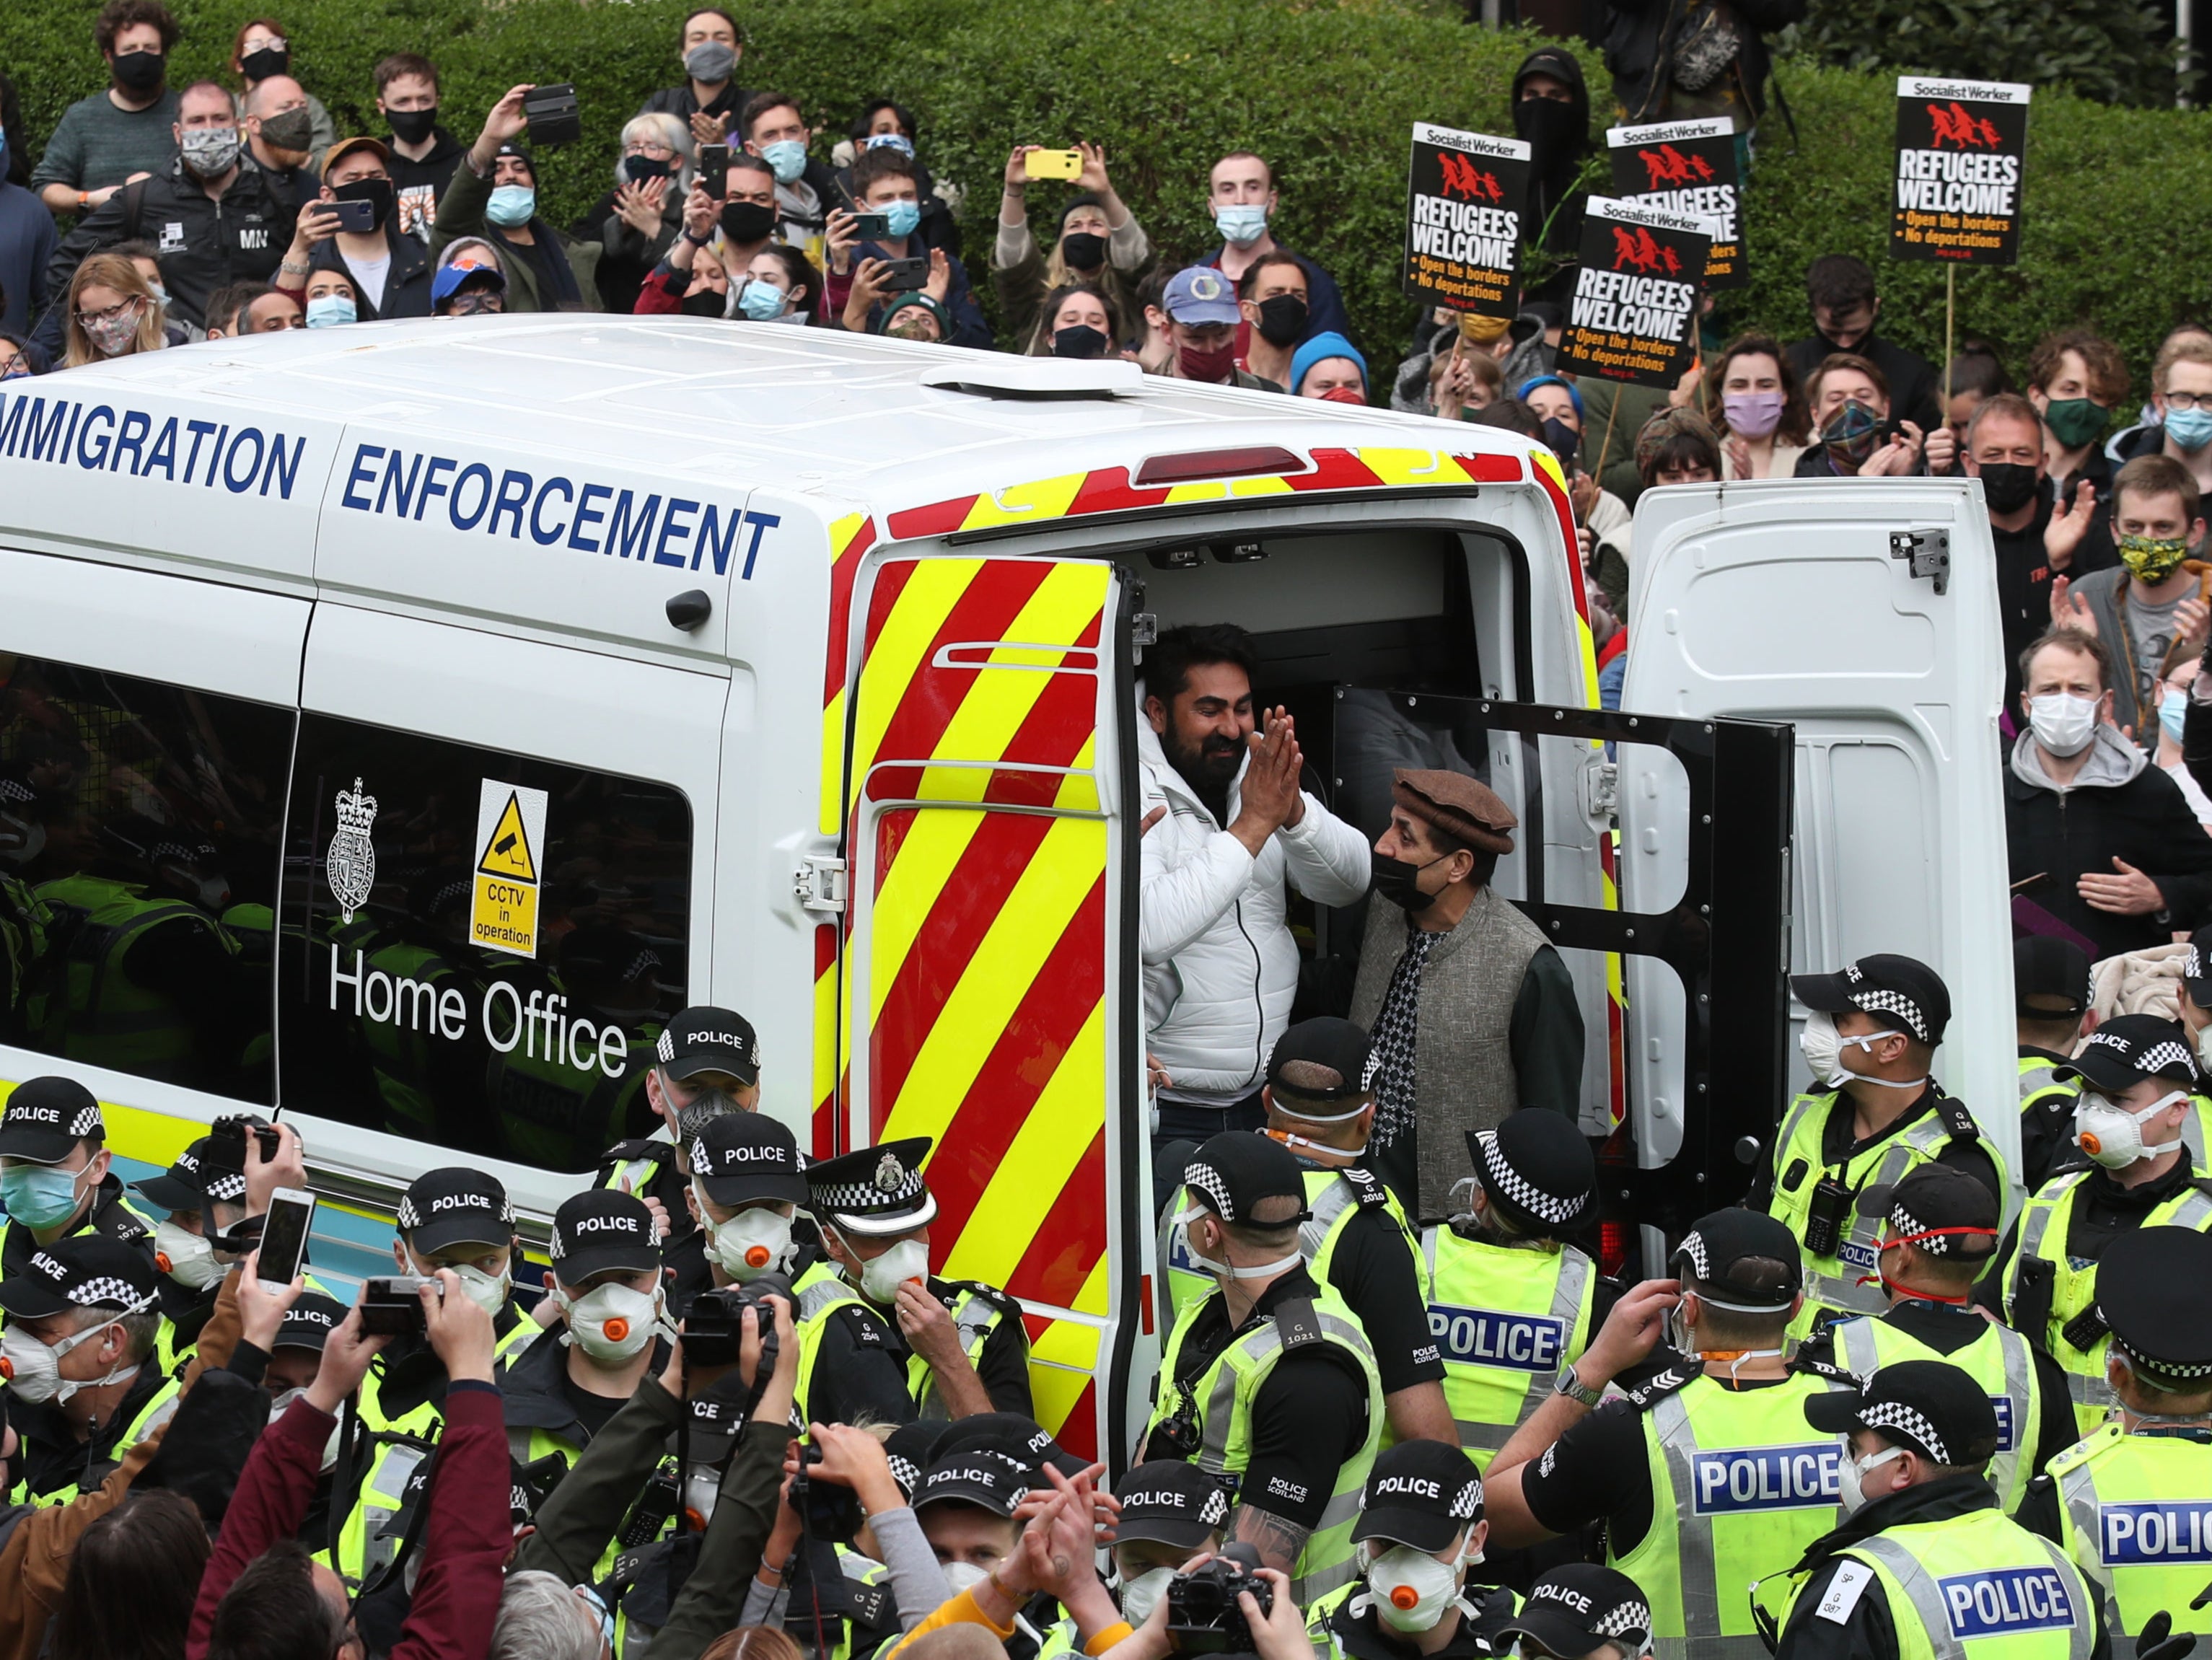 One of the two detained men thanks crowds as he is freed from the immigration van in Kenmure Street, Glasgow, on Thursday